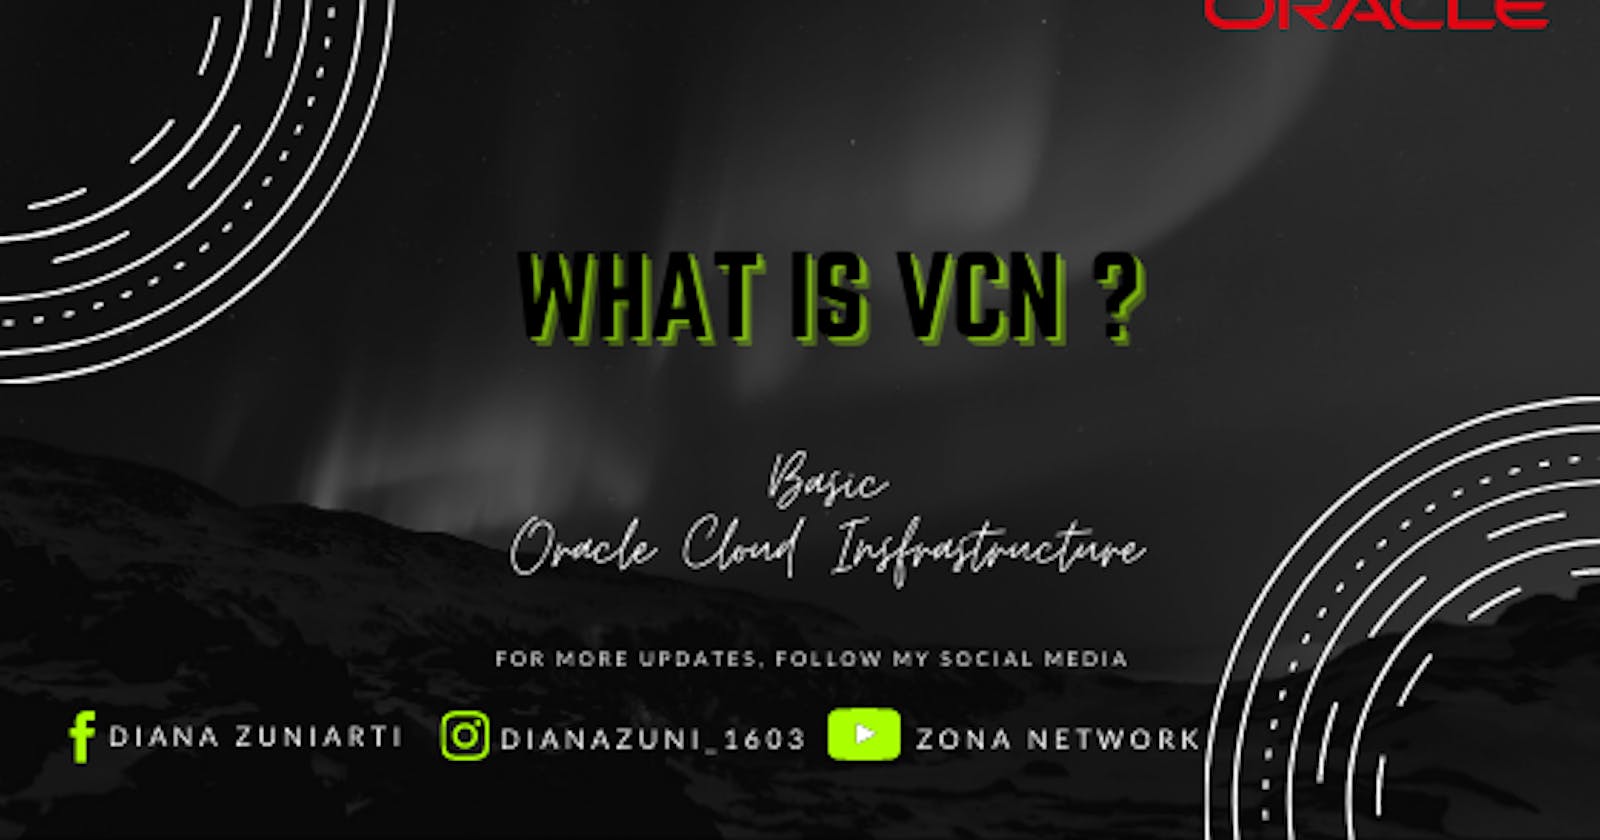 VCN On Oracle Cloud Infrastructure